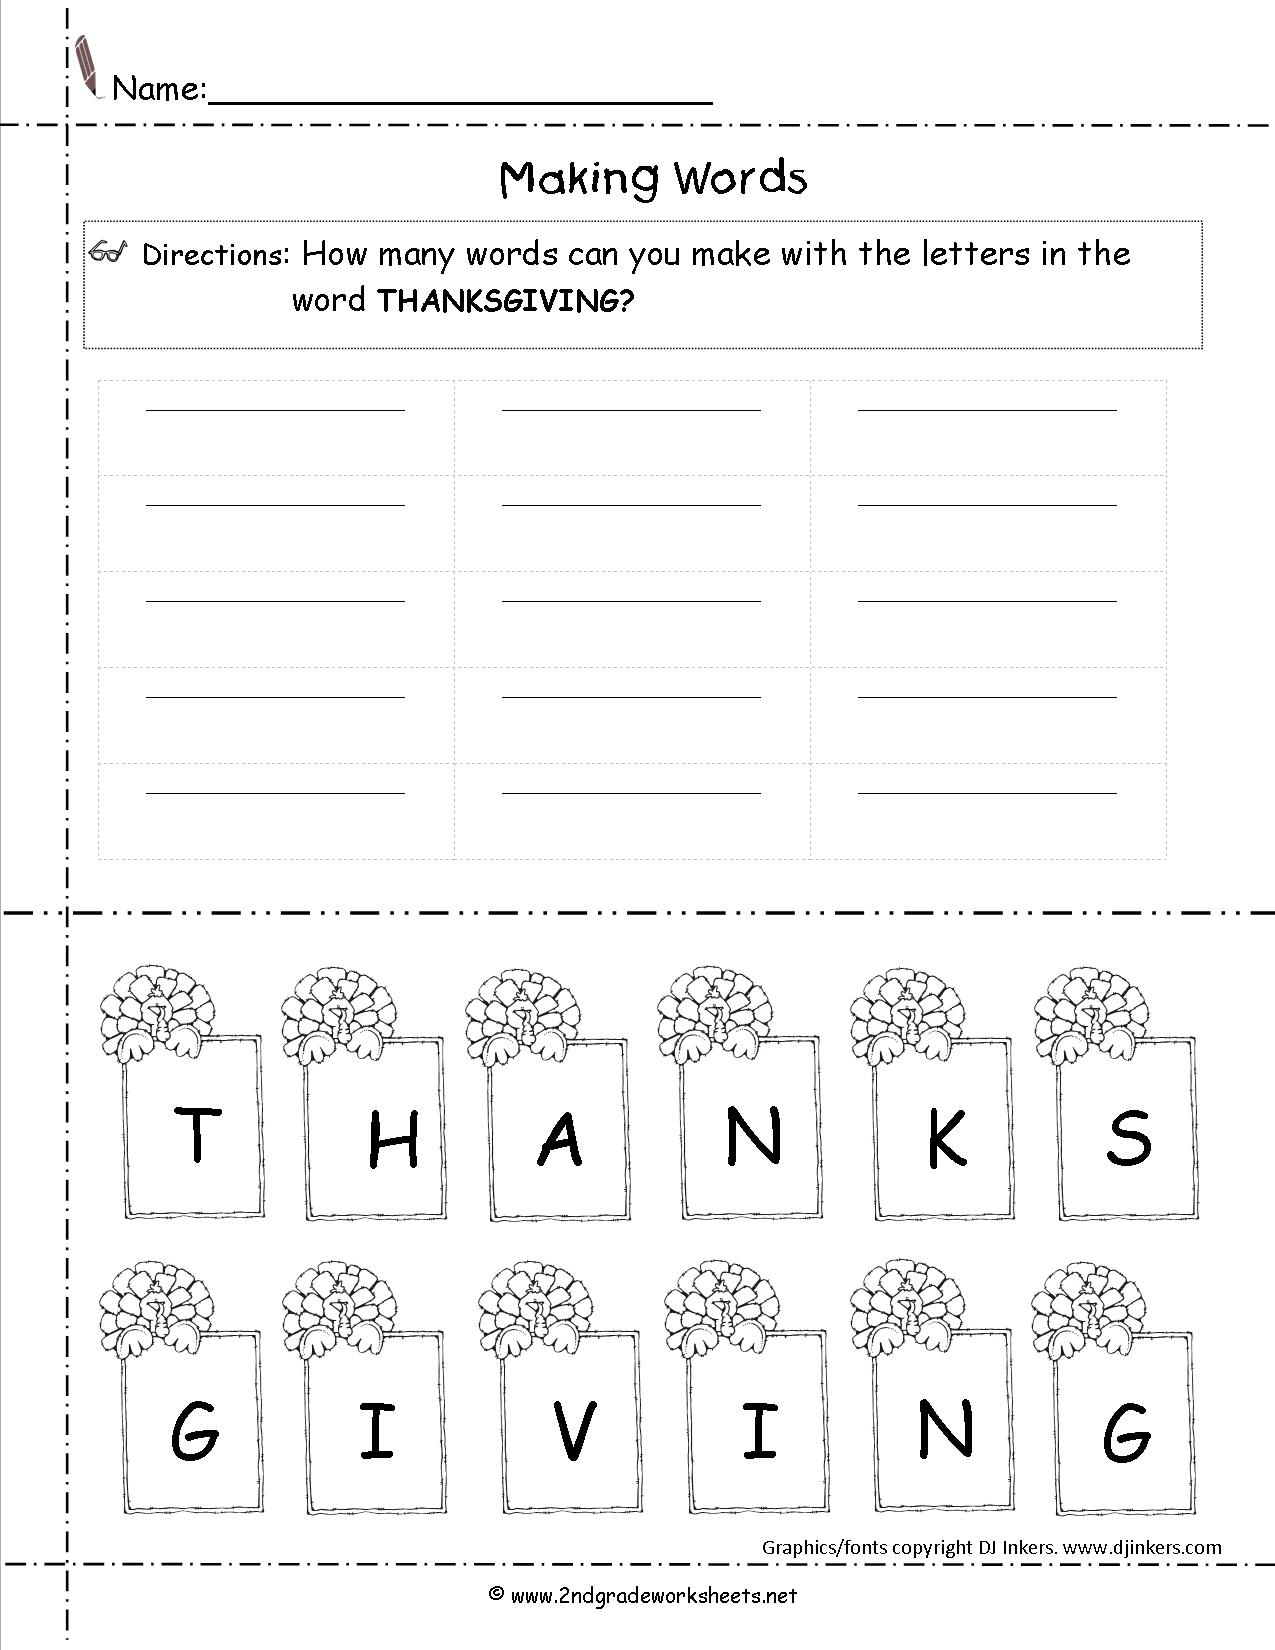 Thanksgiving Printouts And Worksheets - Free Printable Thanksgiving Math Worksheets For 3Rd Grade